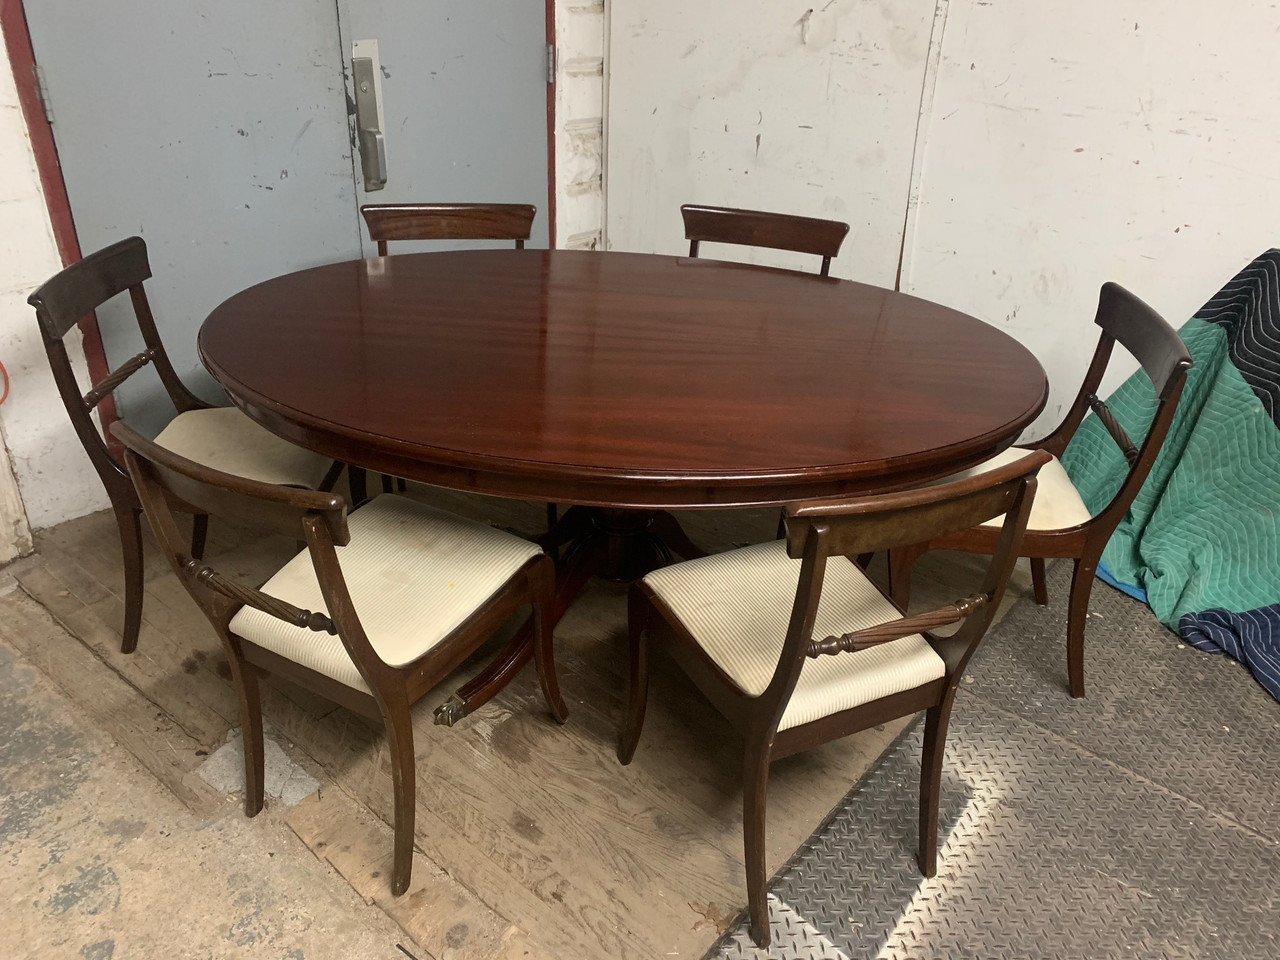 5.5 ft oval mahogany dining table with 6 chairs ...